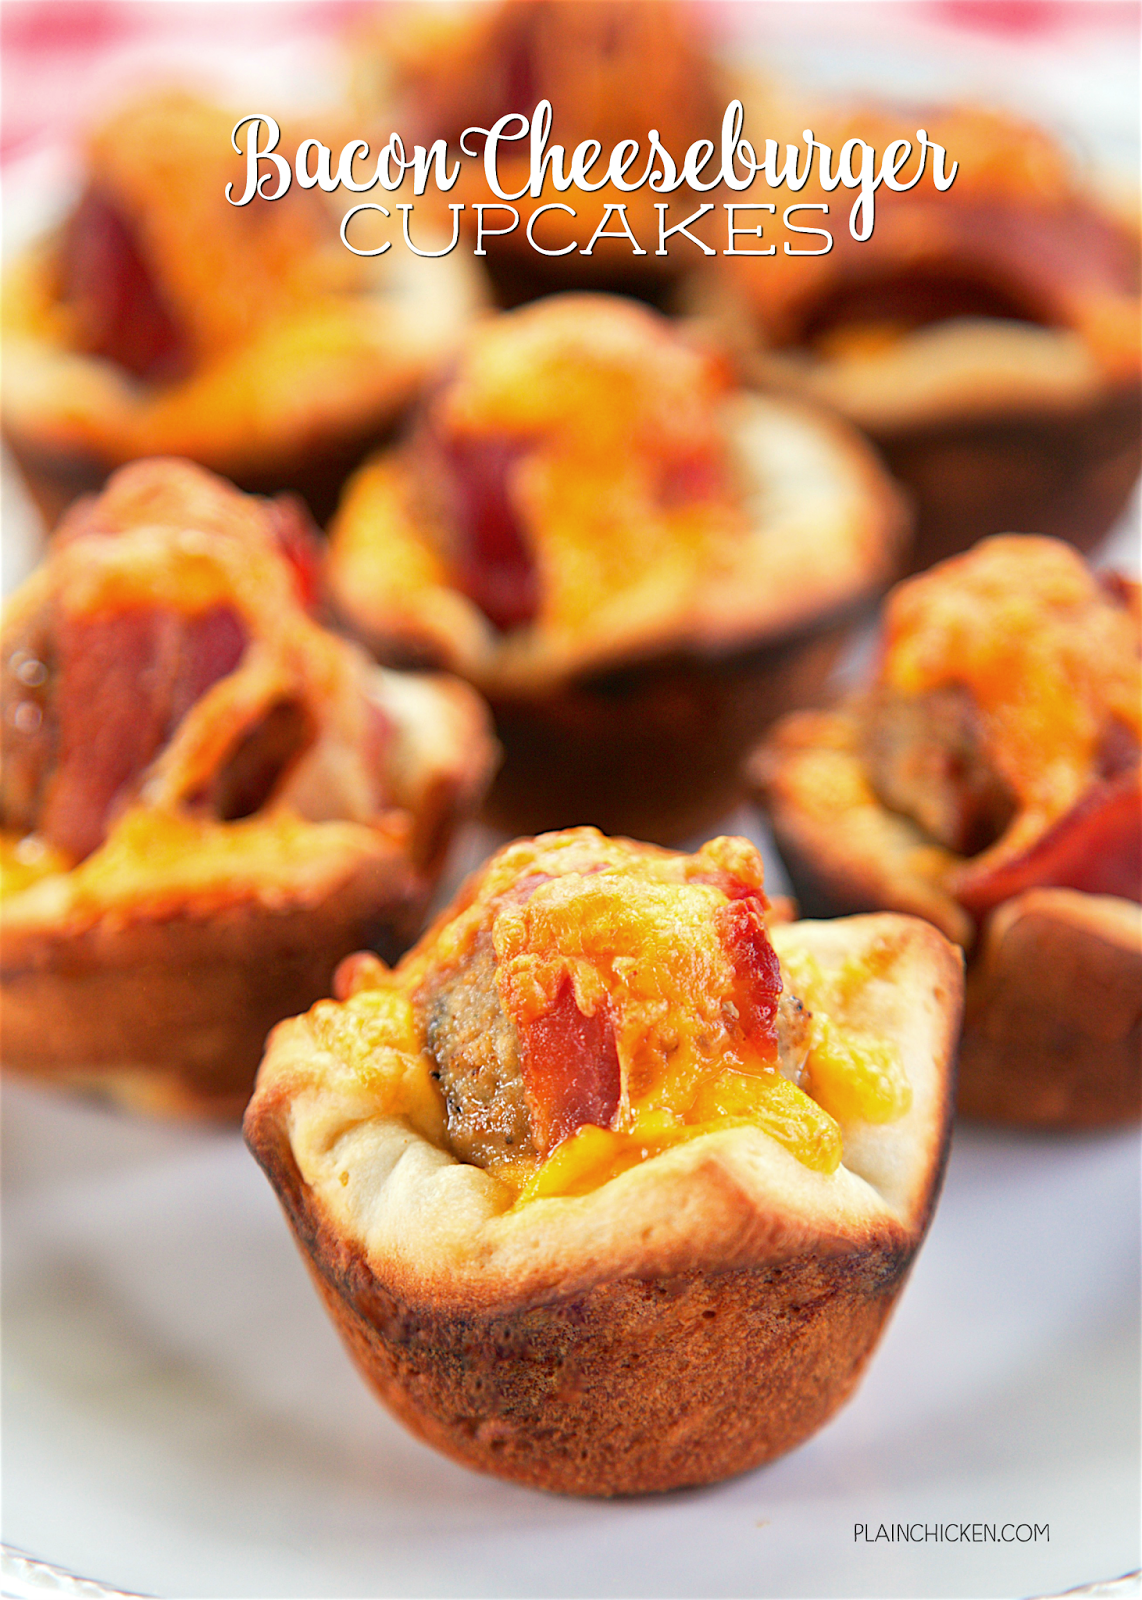 Bacon Cheeseburger Cupcakes - only 4 ingredients! Refrigerated pizza crust, frozen meatballs, precooked bacon and cheese. Ready in minutes! Great for a quick lunch, dinner or tailgating!! Everyone loves these! Can freeze leftovers for later.